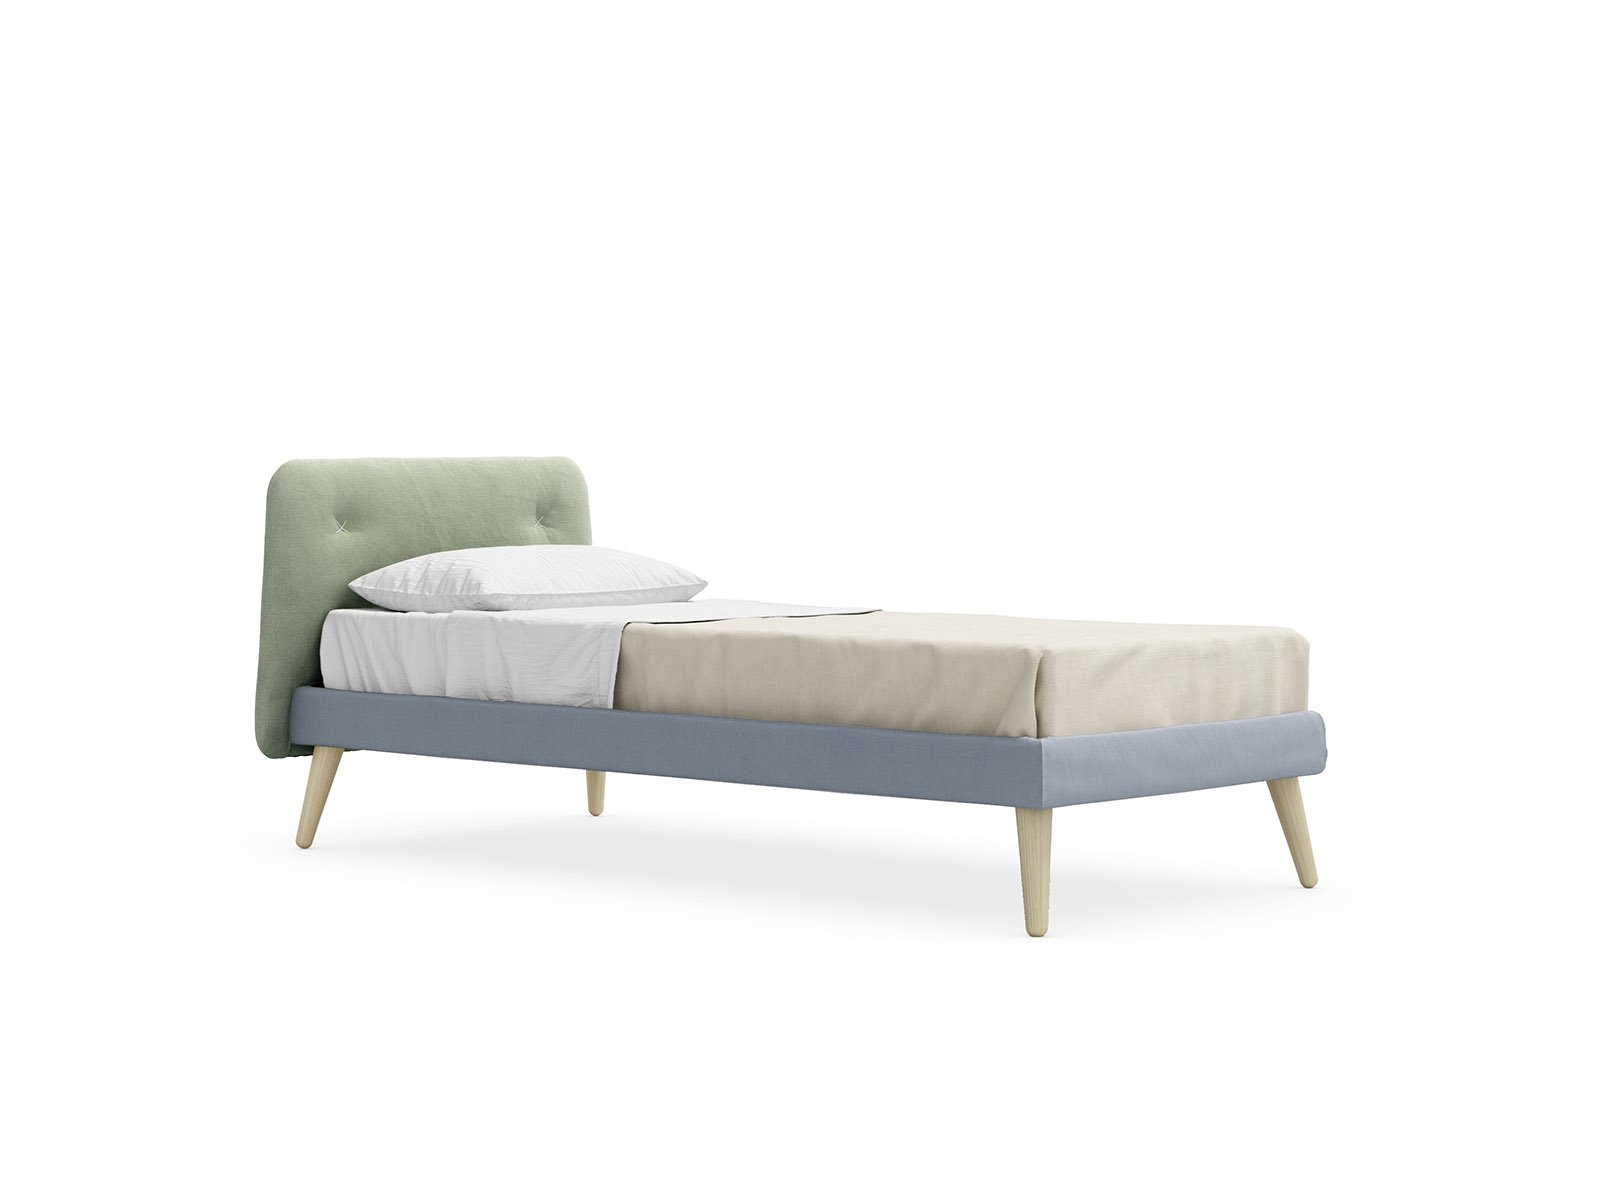 Cleo single bed